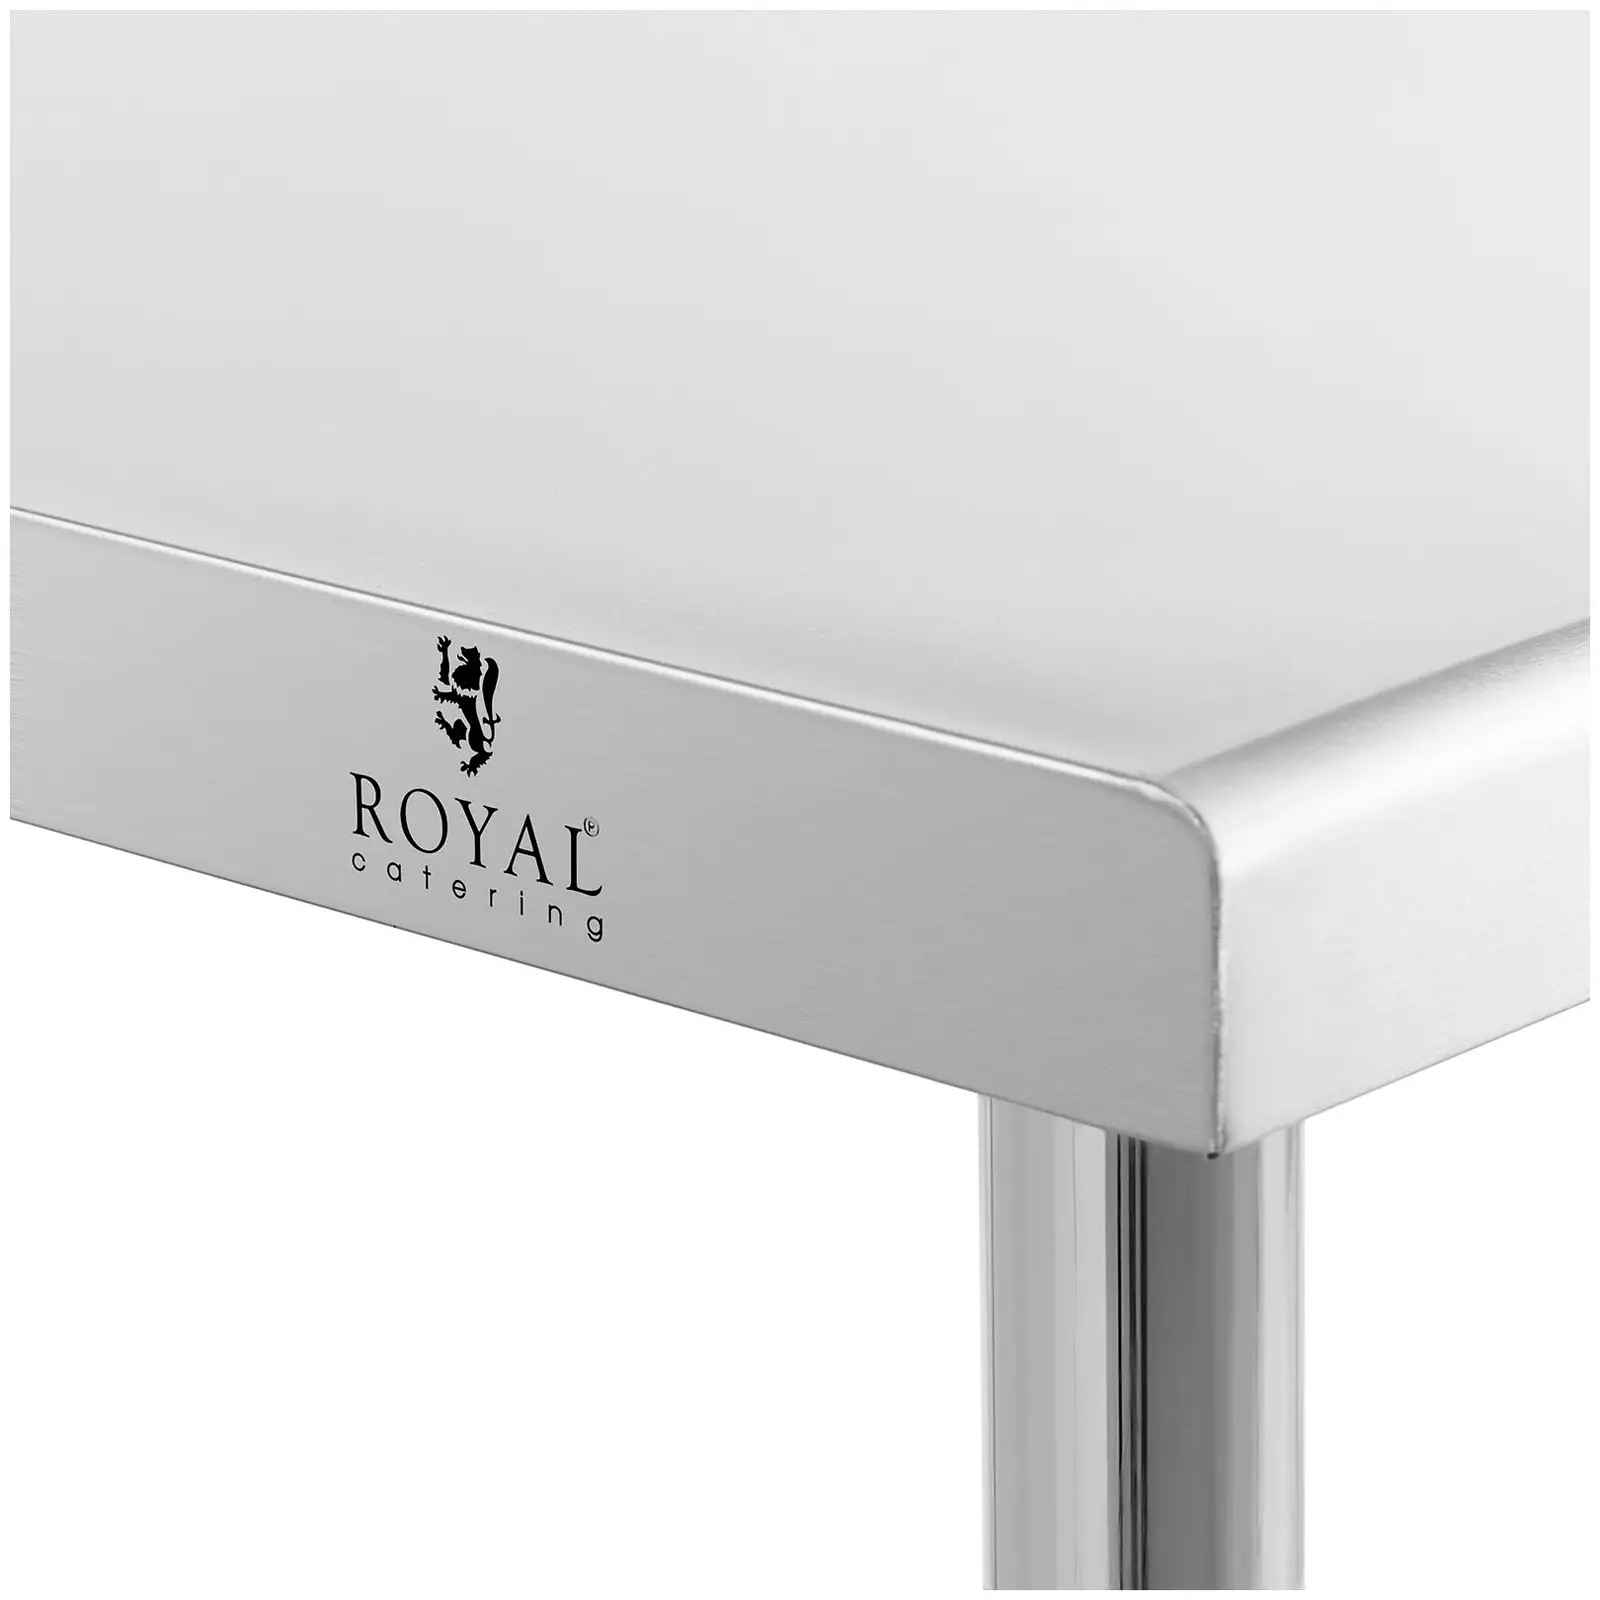 Stainless Steel Work Table - 200 x 90 cm - upstand - 100 kg bearing capacity - Royal Catering